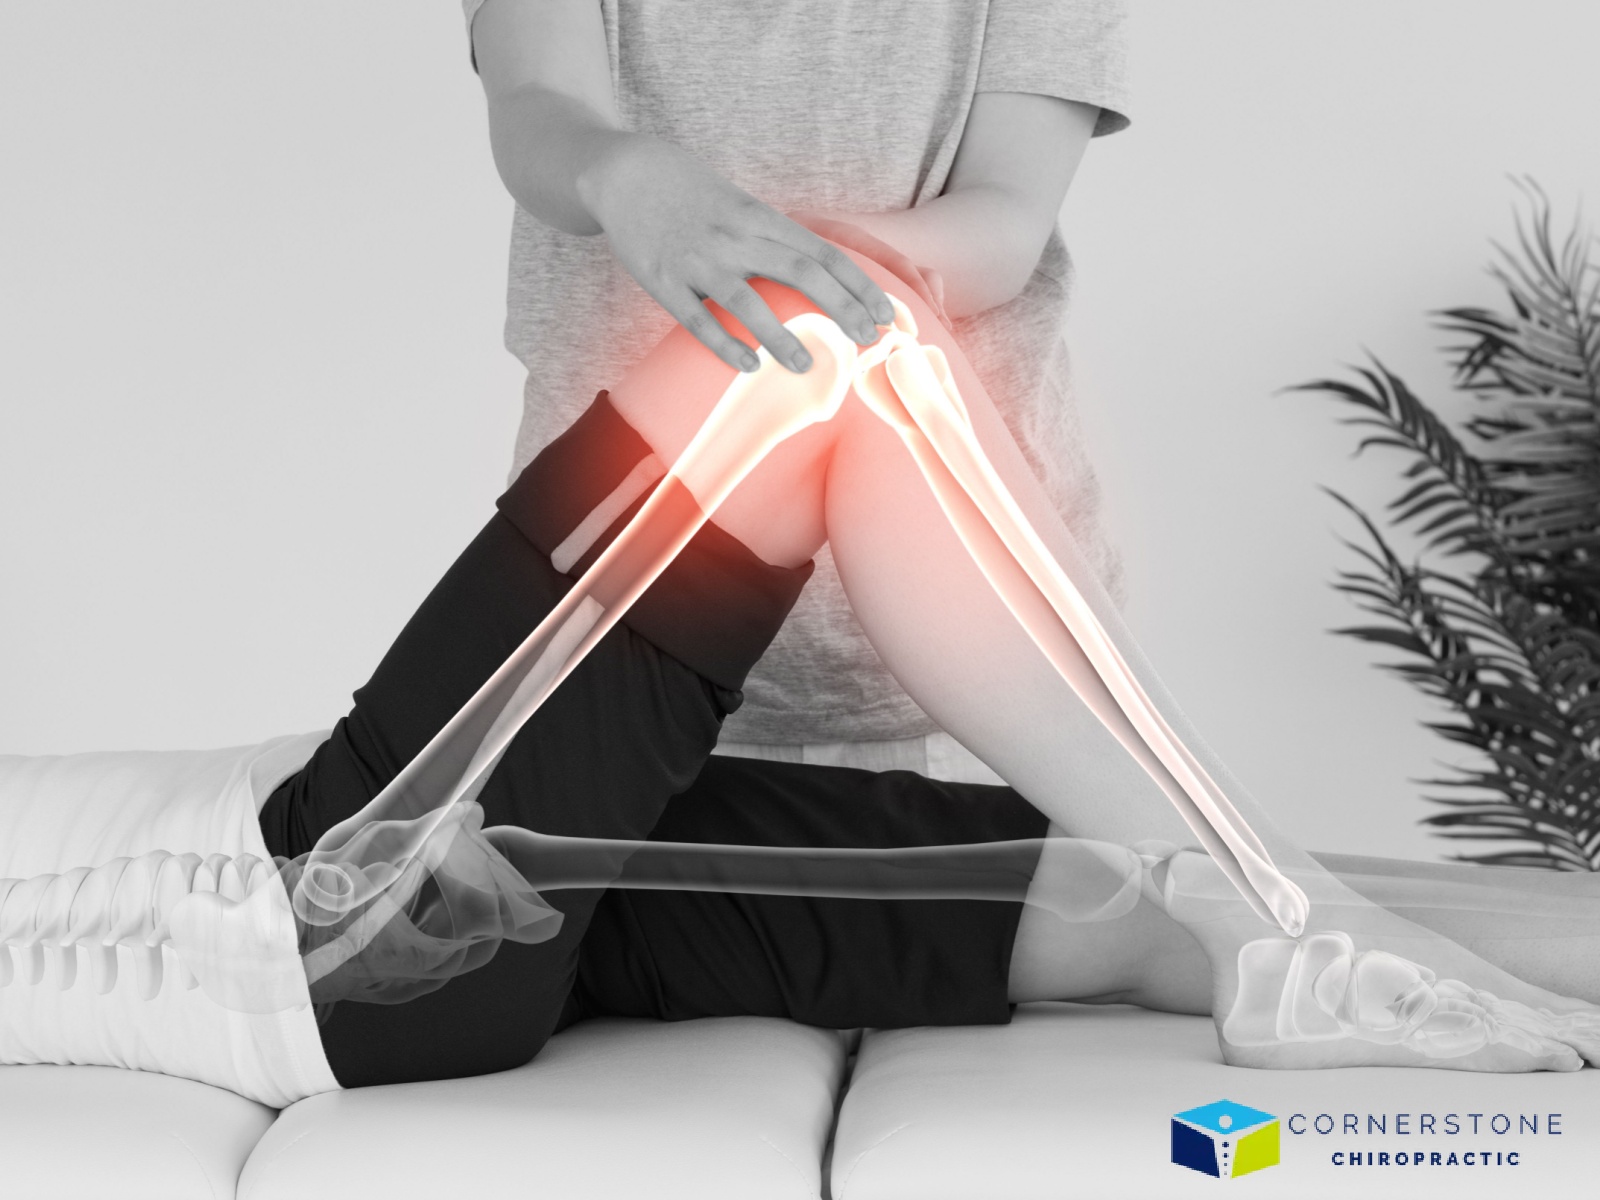 Powerful Extremity Adjustments with Cornerstone Chiropractic